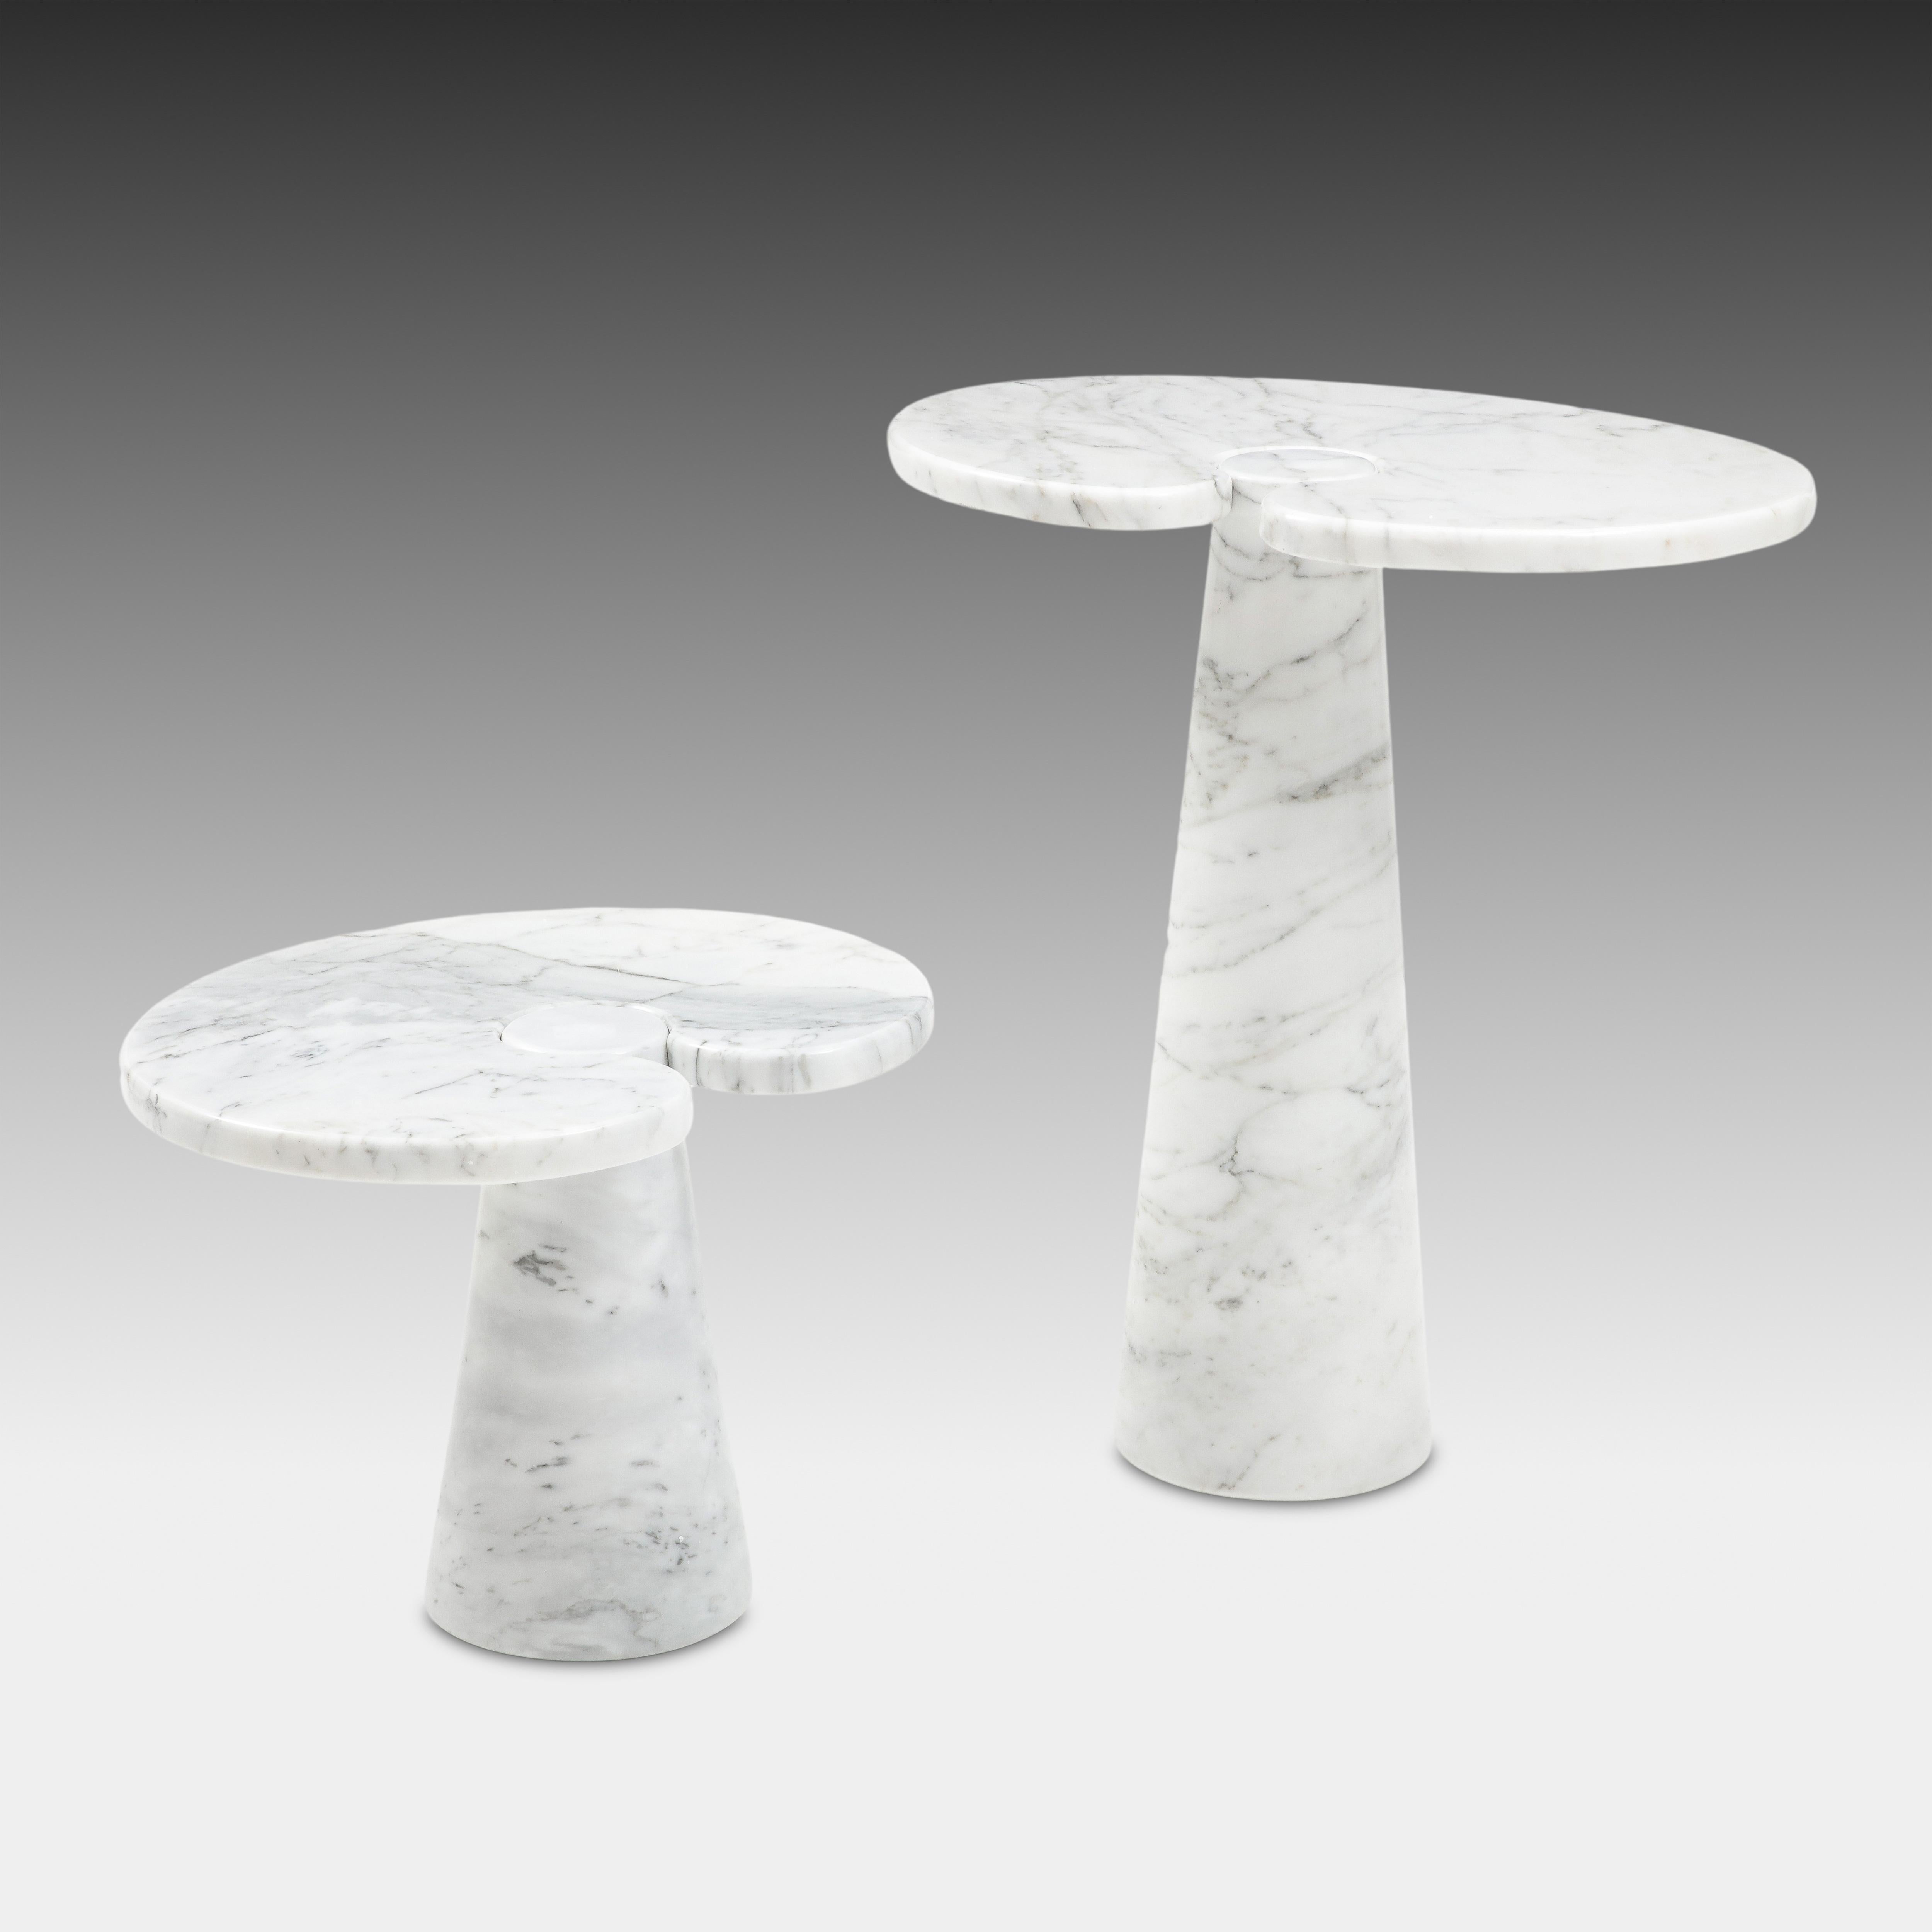 Angelo Mangiarotti Carrara Marble Tall Side Table from Eros Series, 1971 For Sale 4